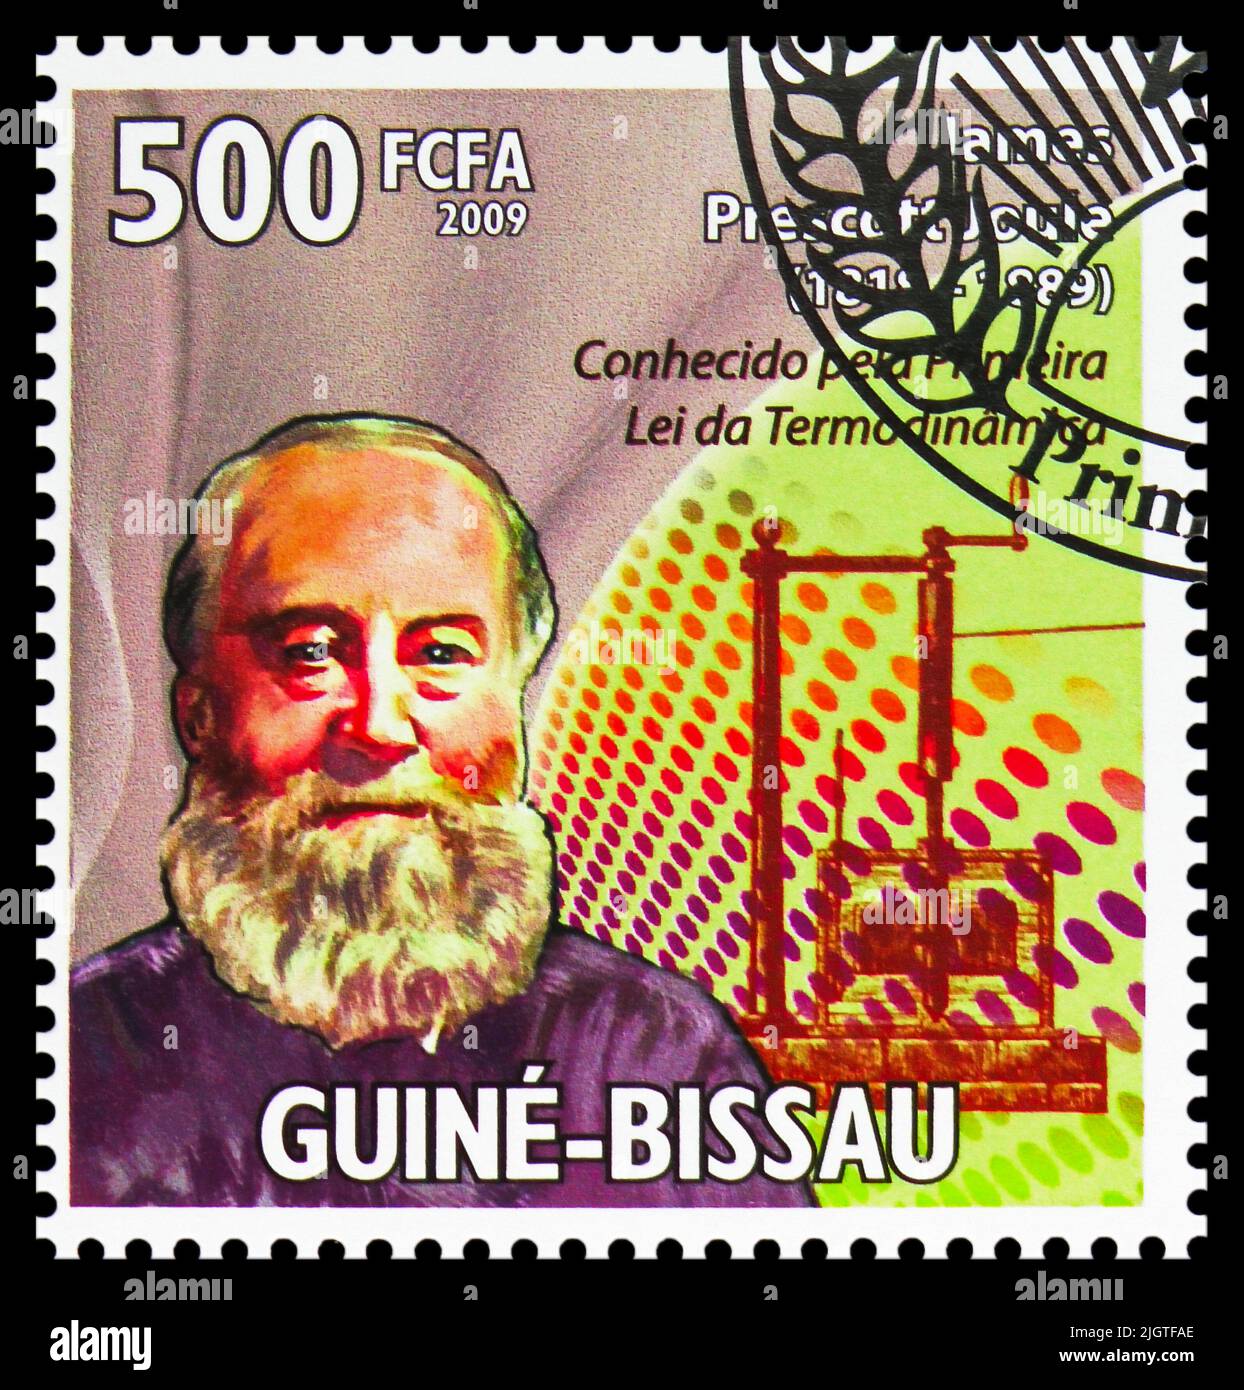 MOSCOW, RUSSIA - JUNE 17, 2022: Postage stamp printed in Guinea-Bissau shows James Prescott Joule, Famous physicists serie, circa 2009 Stock Photo